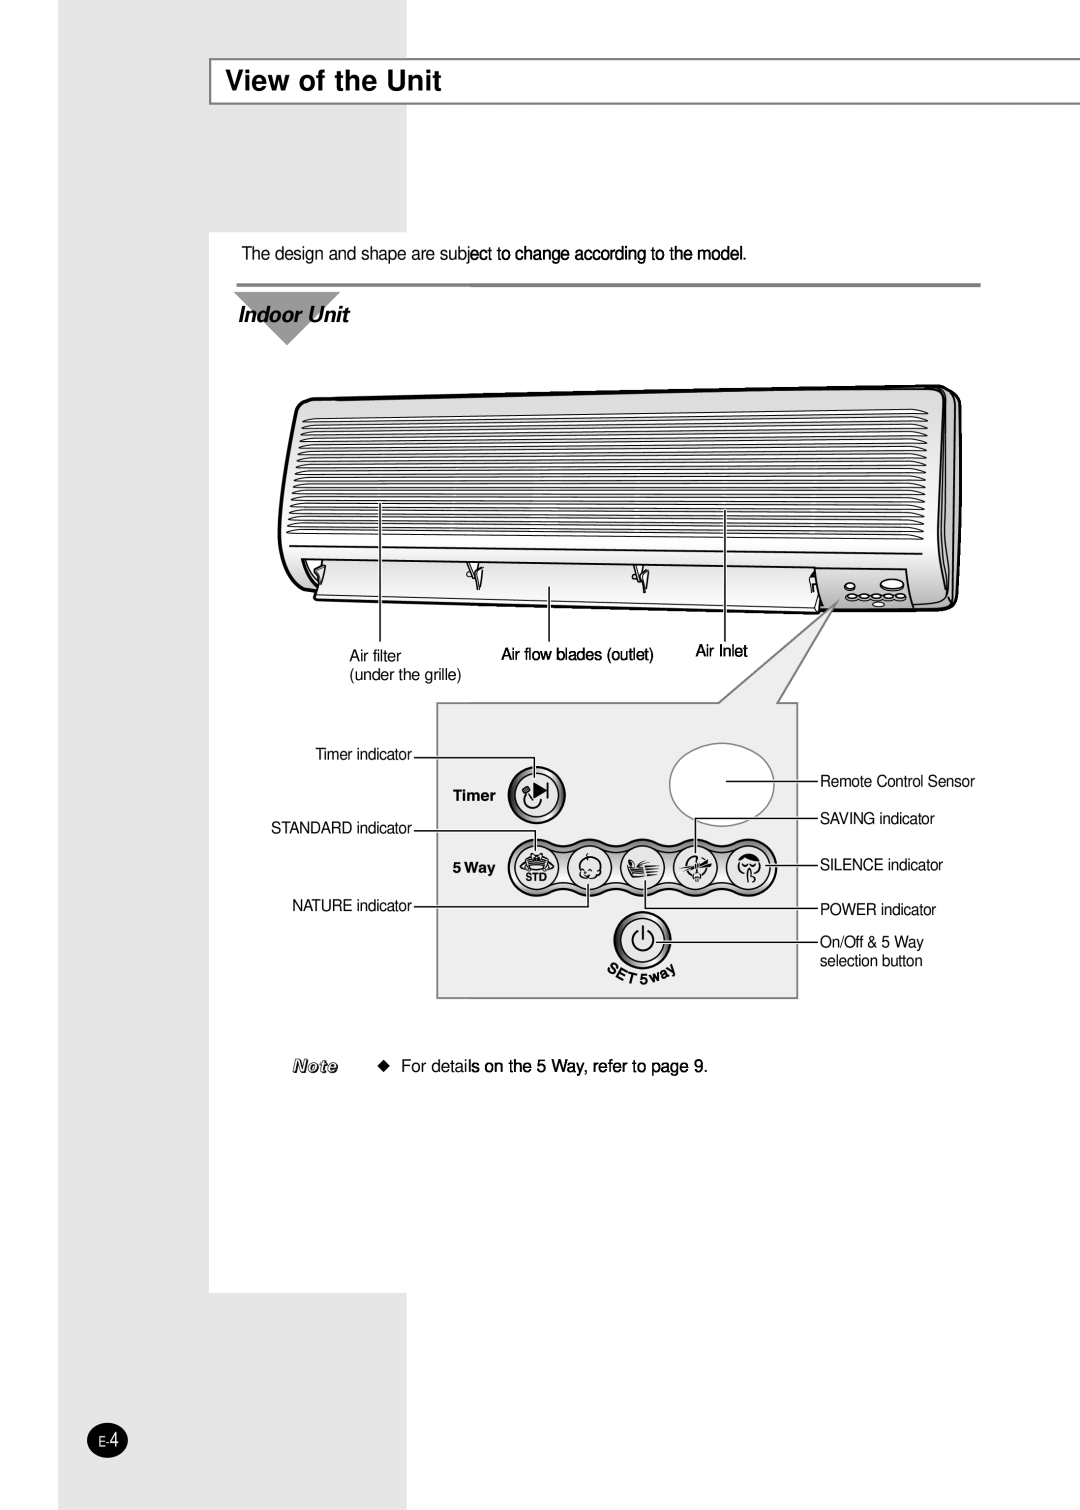 Samsung AM18B1(B2)C09 installation manual View of the Unit, Indoor Unit 